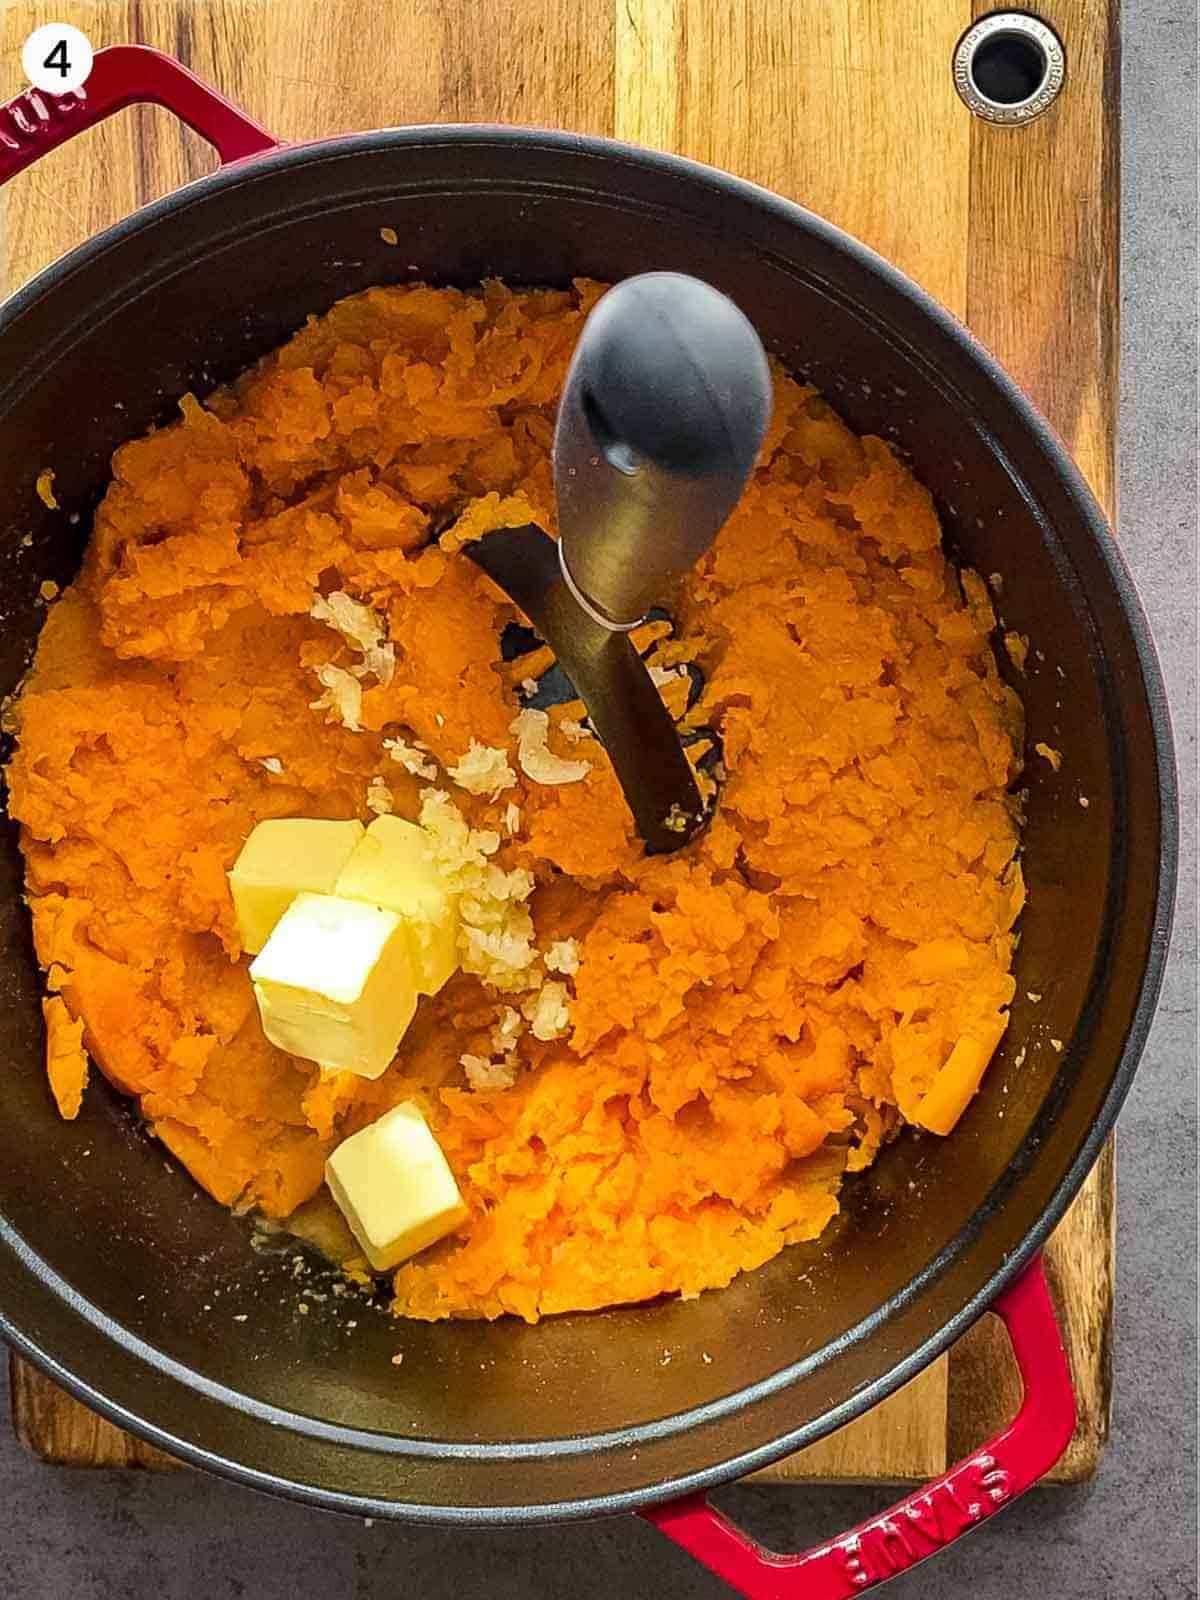 Adding cubes of butter into mashed sweet potatoes in a Ducth oven